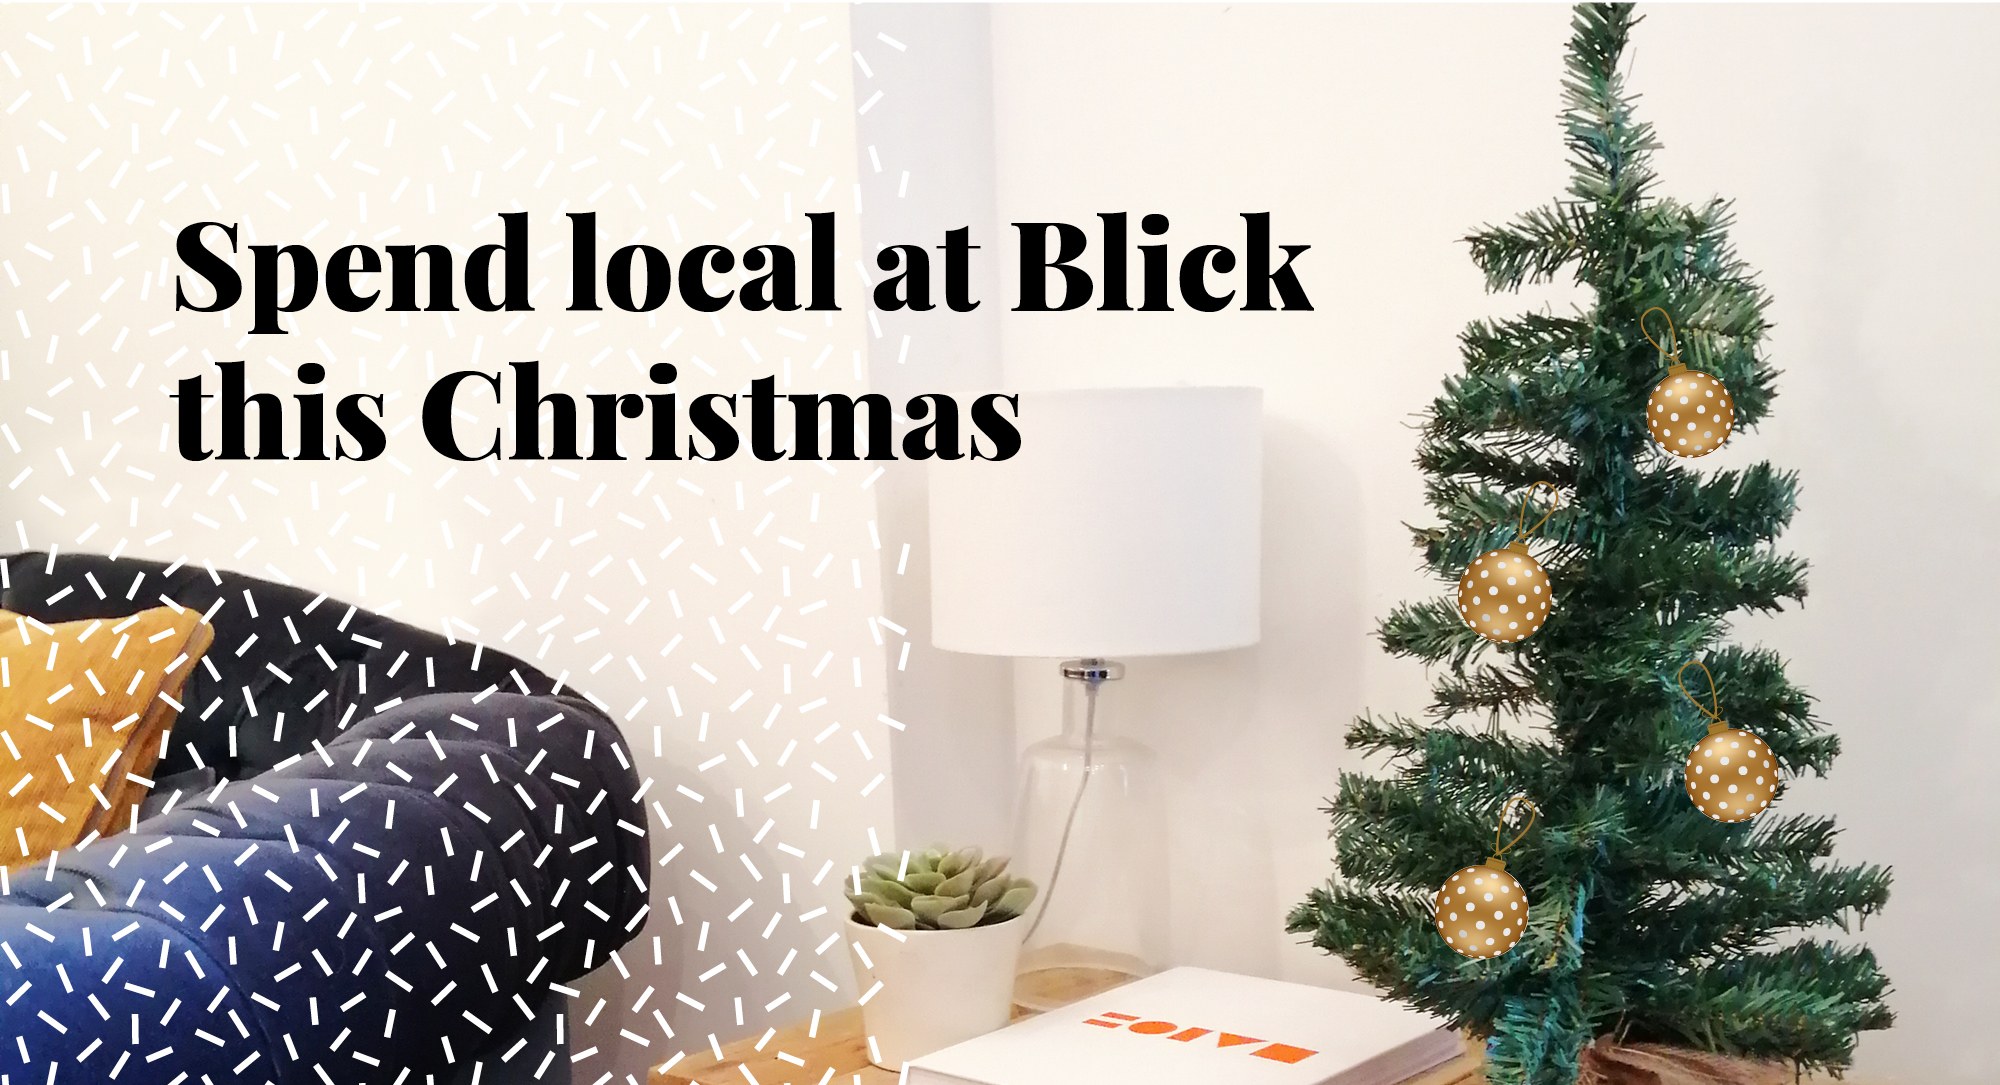 Spend local at Blick